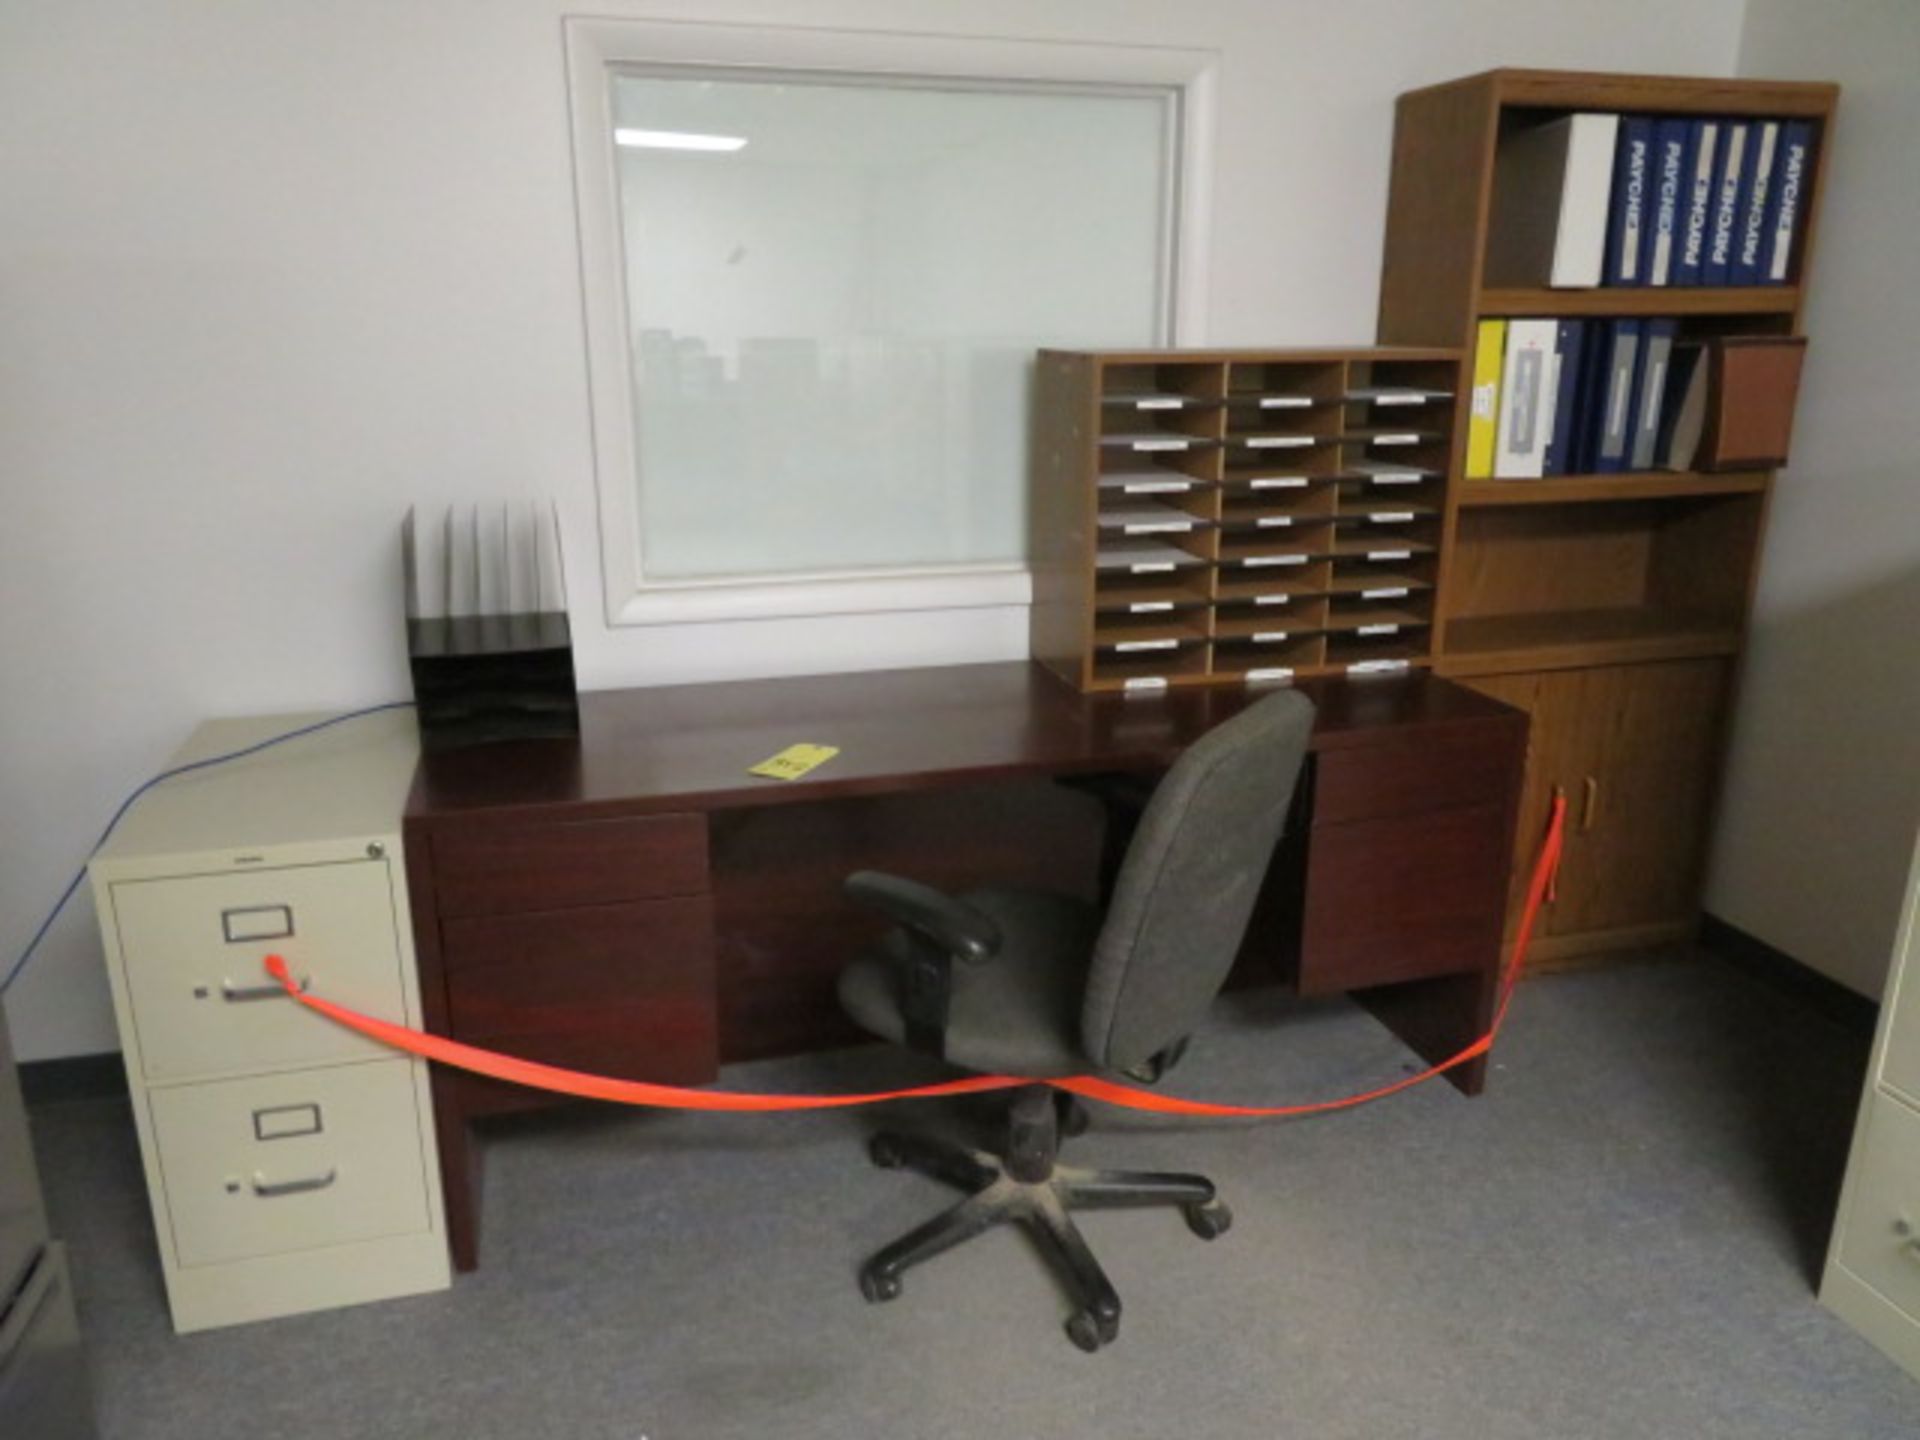 LOT CONSISTING OF OFFICE FURNITURE: 4-drawer desk, chair, 2-drawer file cabinet, multiple file